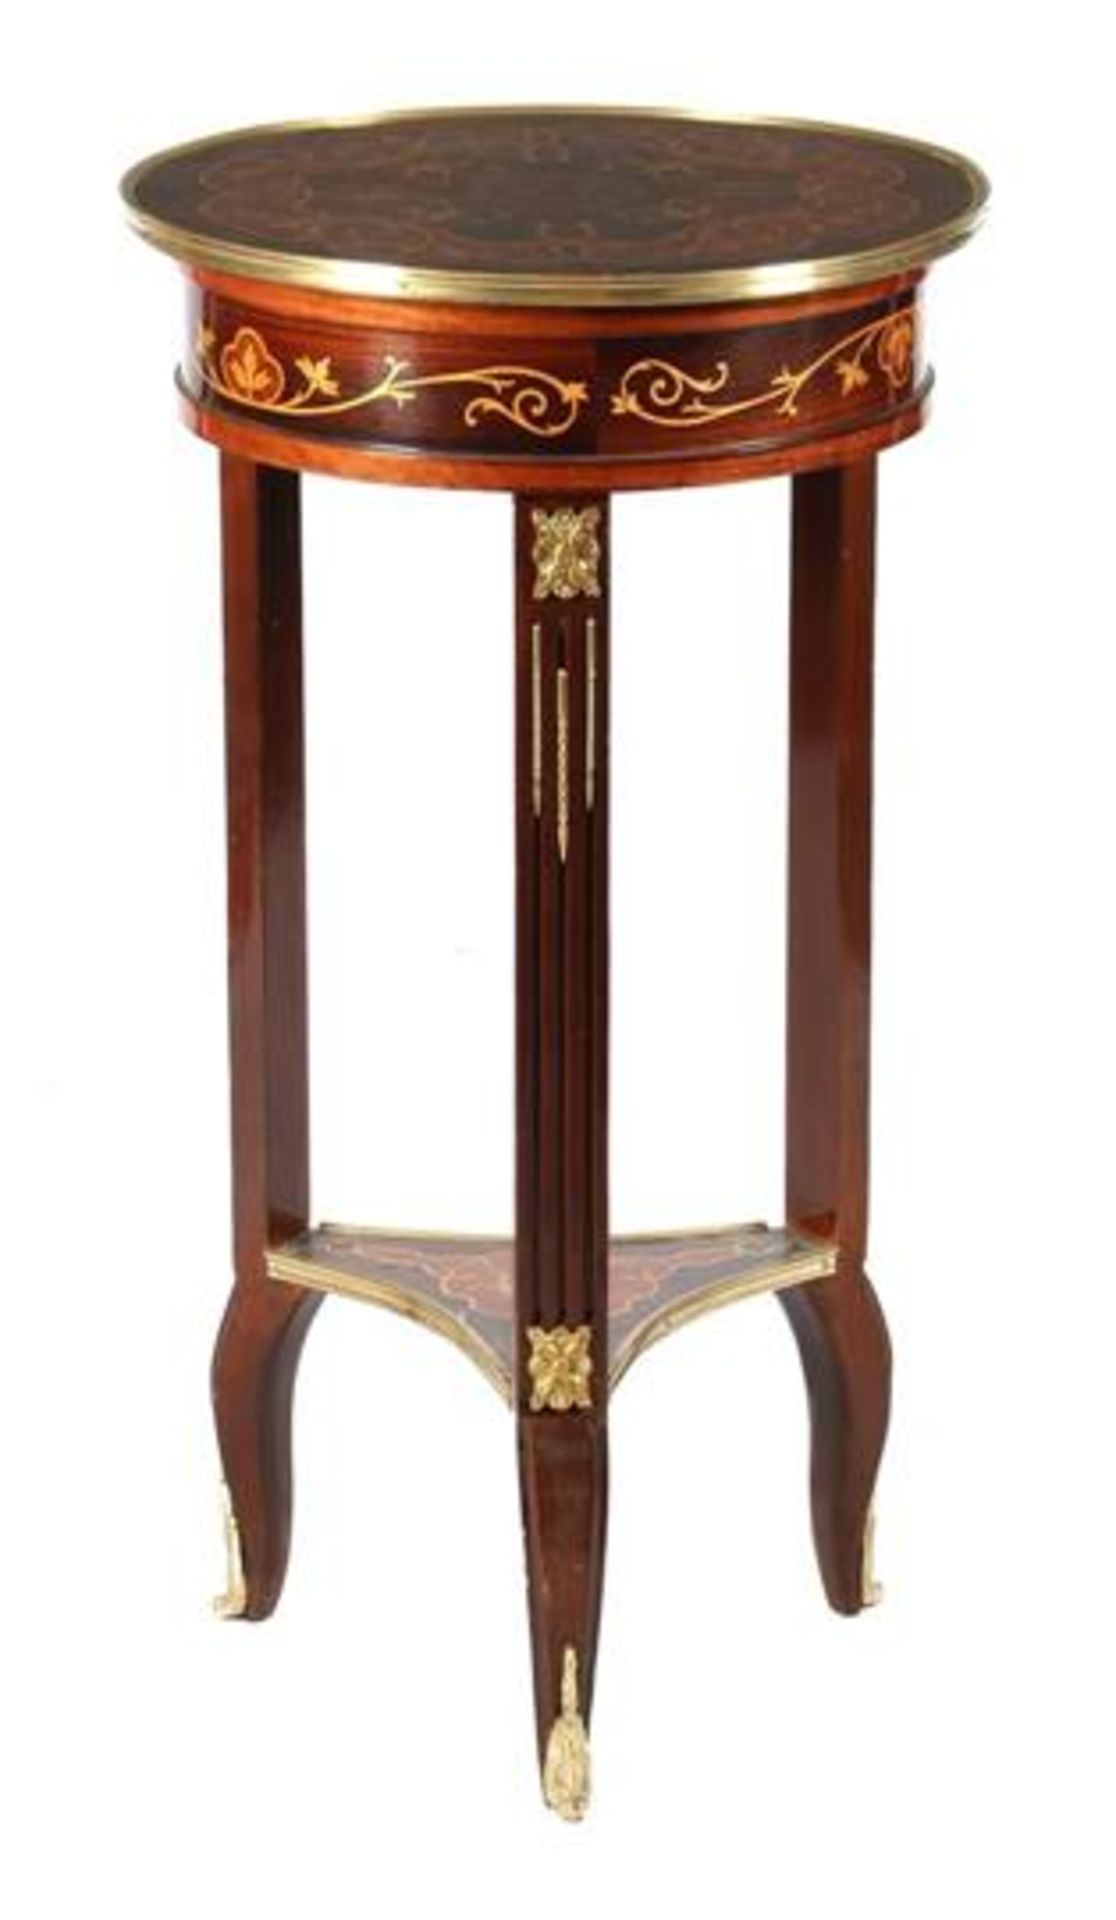 Round & nbsp; classic side table with beautiful inlay and bronze ornaments, 82 cm high, 45 cm